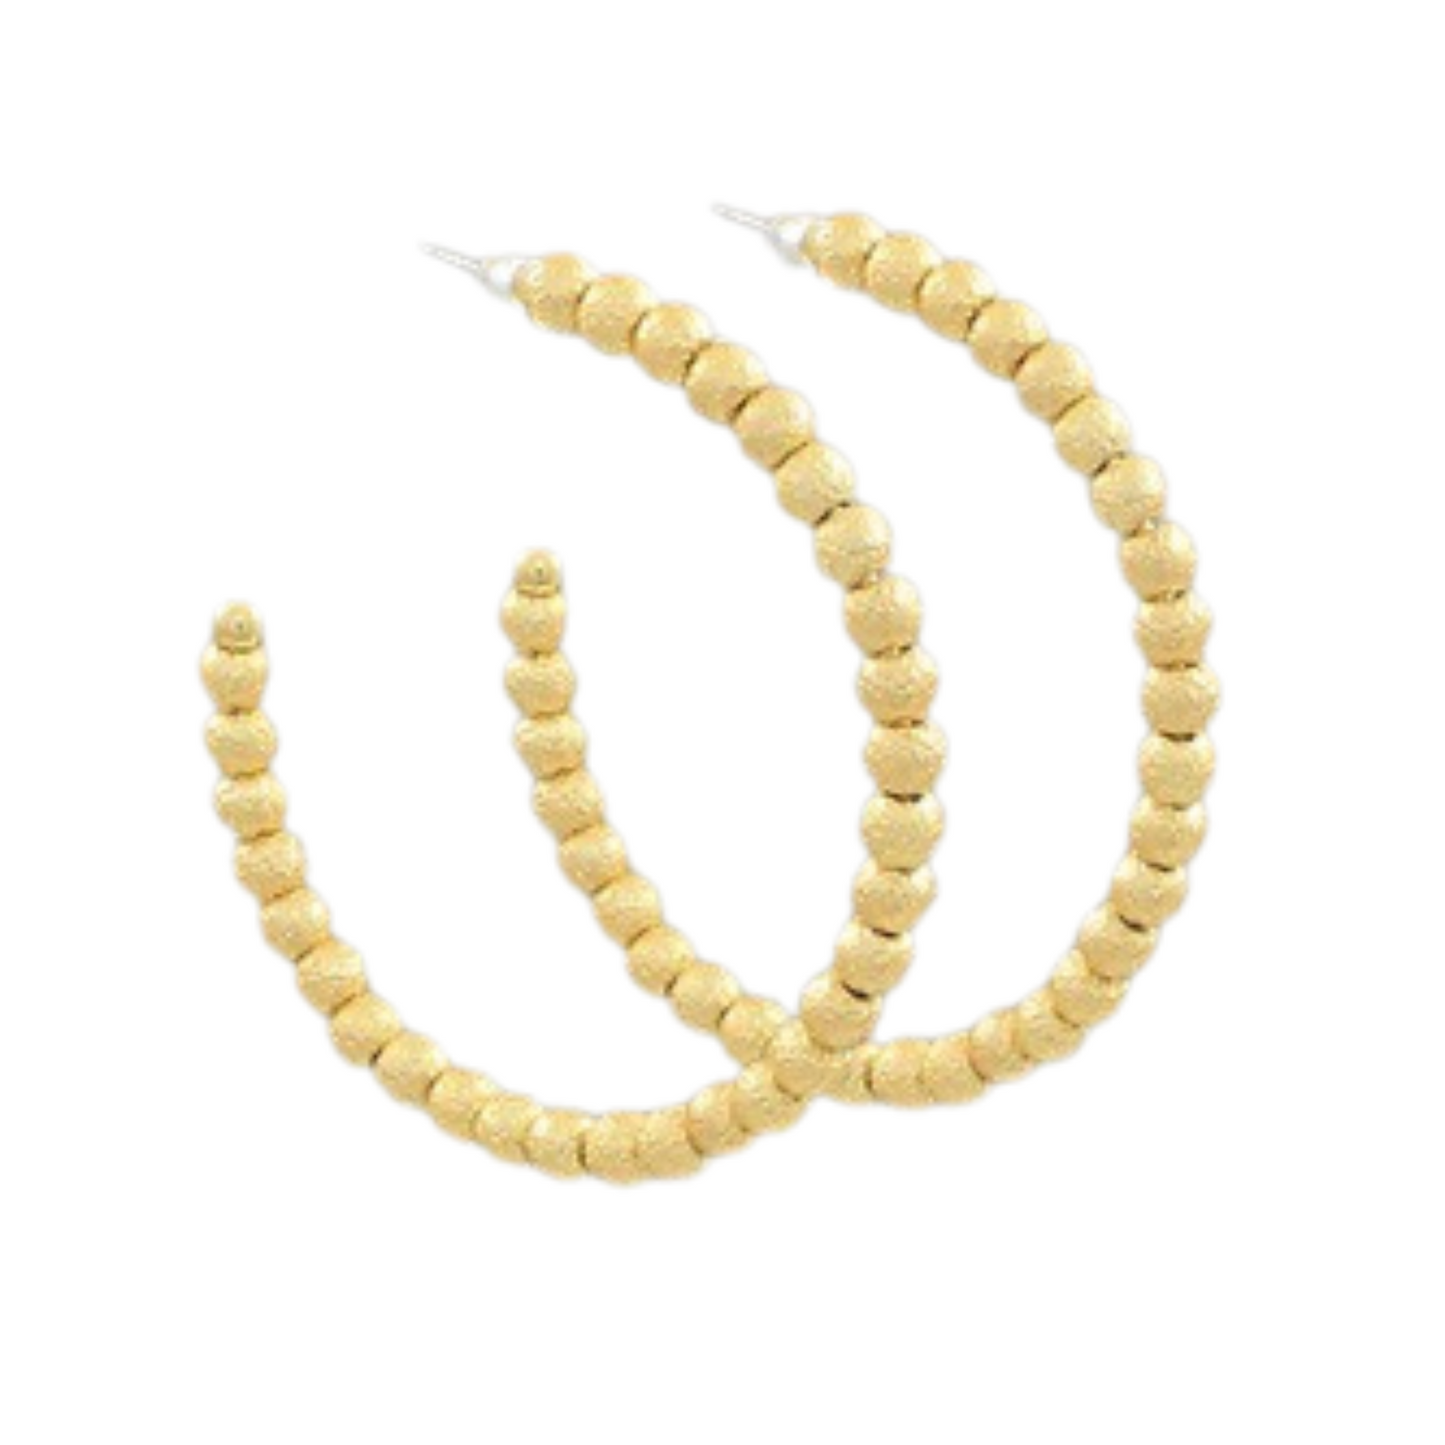 Crafted with a striking gold tone and textured metal bead design, our Textured Metal Hoops add a touch of elegance to any outfit. These versatile earrings are perfect for day or evening wear and are sure to make a statement wherever you go. Upgrade your jewelry collection with these timeless hoops.